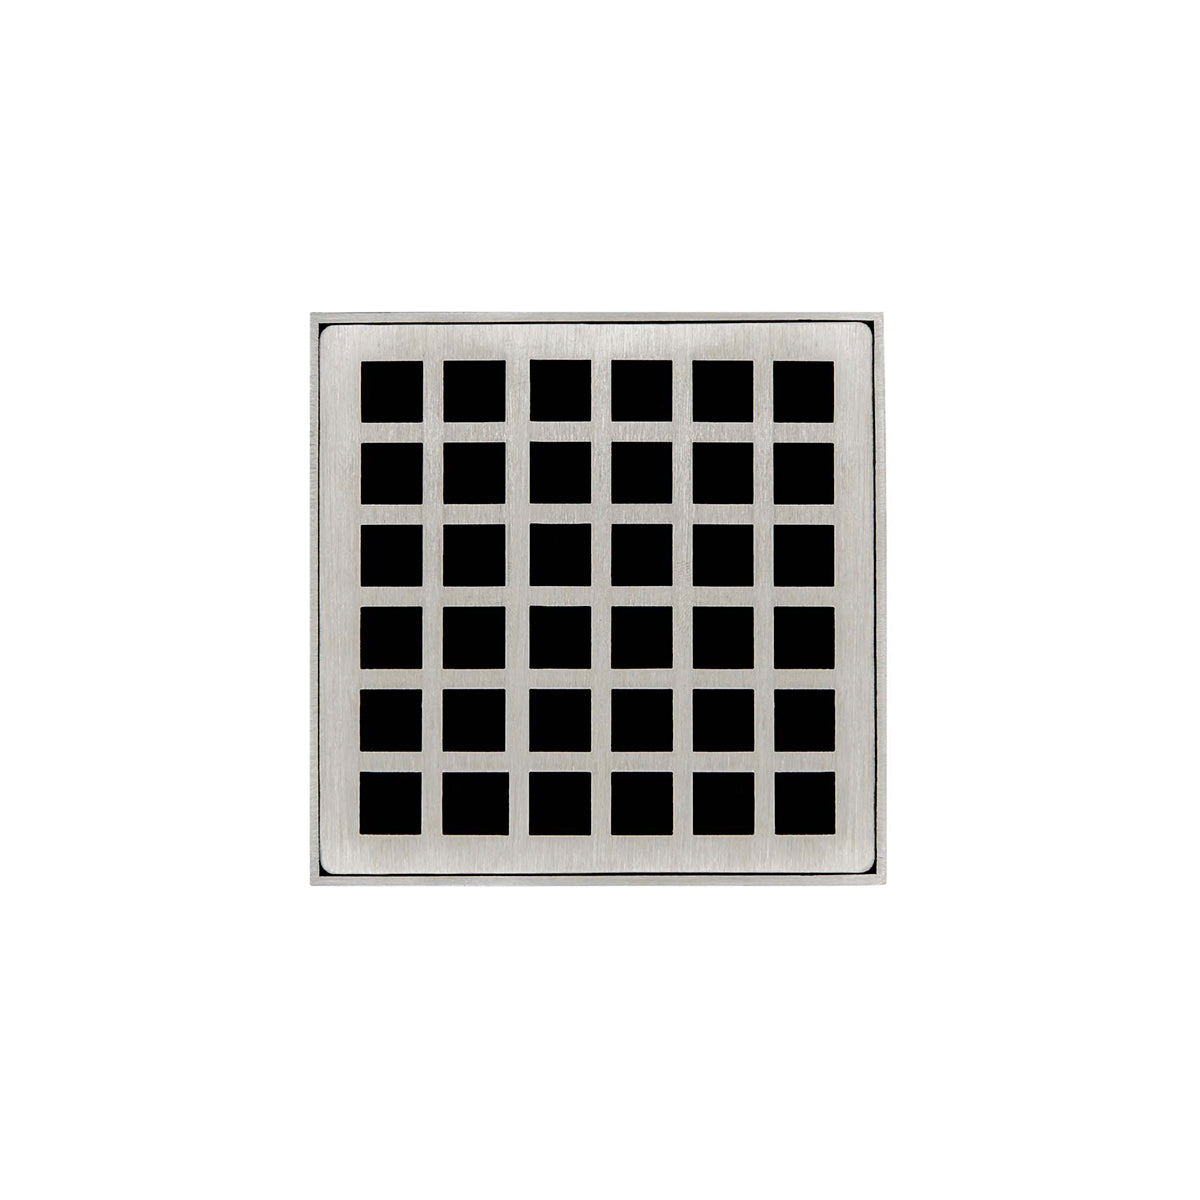 Infinity Drain 4" x 4" QDB 4 Premium Center Drain Kit with Squares Pattern Decorative Plate with ABS Bonded Flange Drain Body, 2", 3" and 4" Outlet